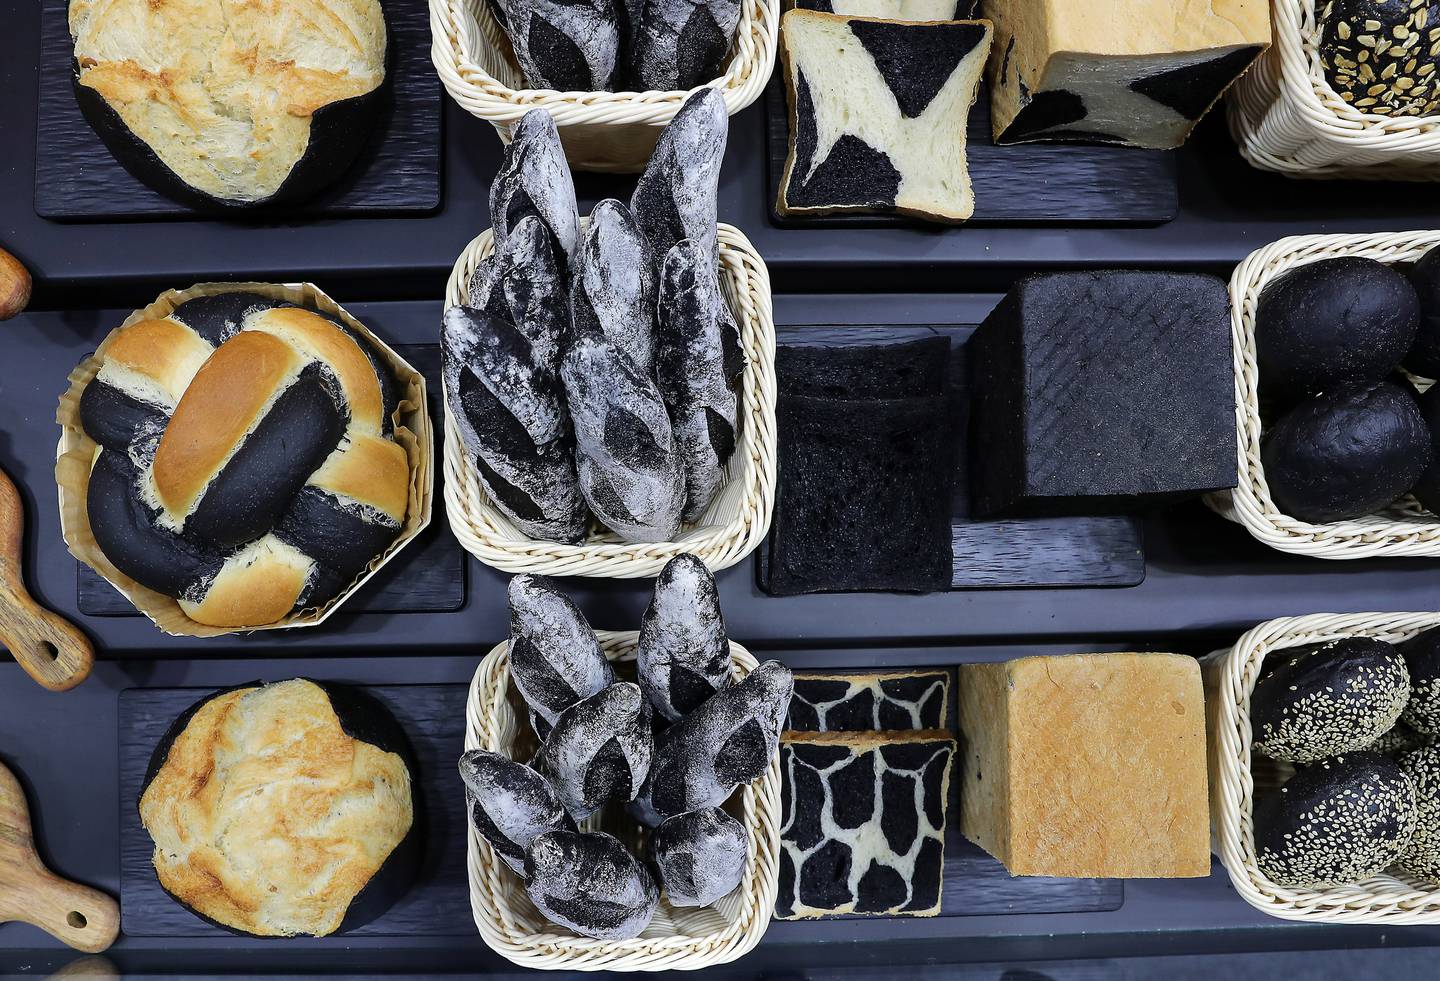 Charcoal-infused bread on display at the Abel & Schafer stand at Gulfood. Pawan Singh / The National